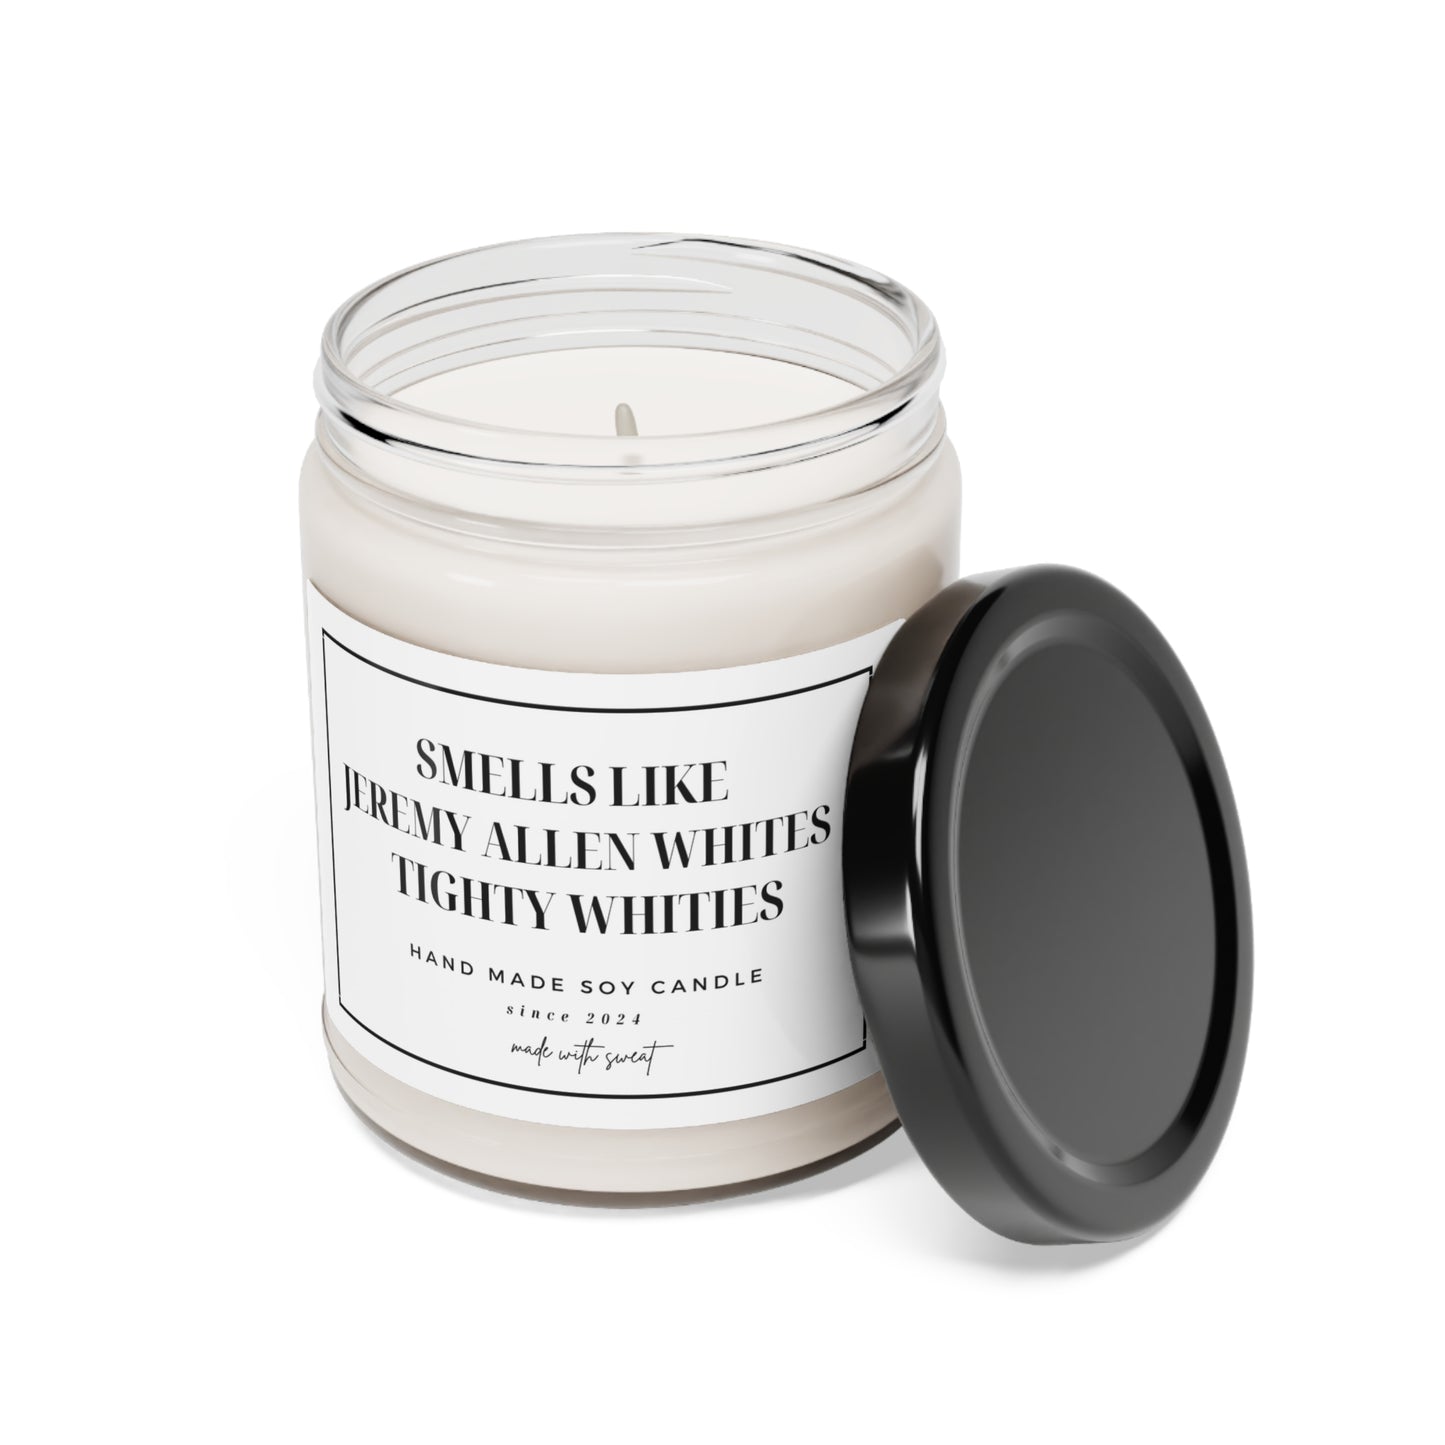 Smells Like Jeremy Allen Whites Tighty Whities Candle, The Bear Gift, Yes Chef Gift, Funny Gift, Gift For Her, Gift For Mom, Gift for Sister